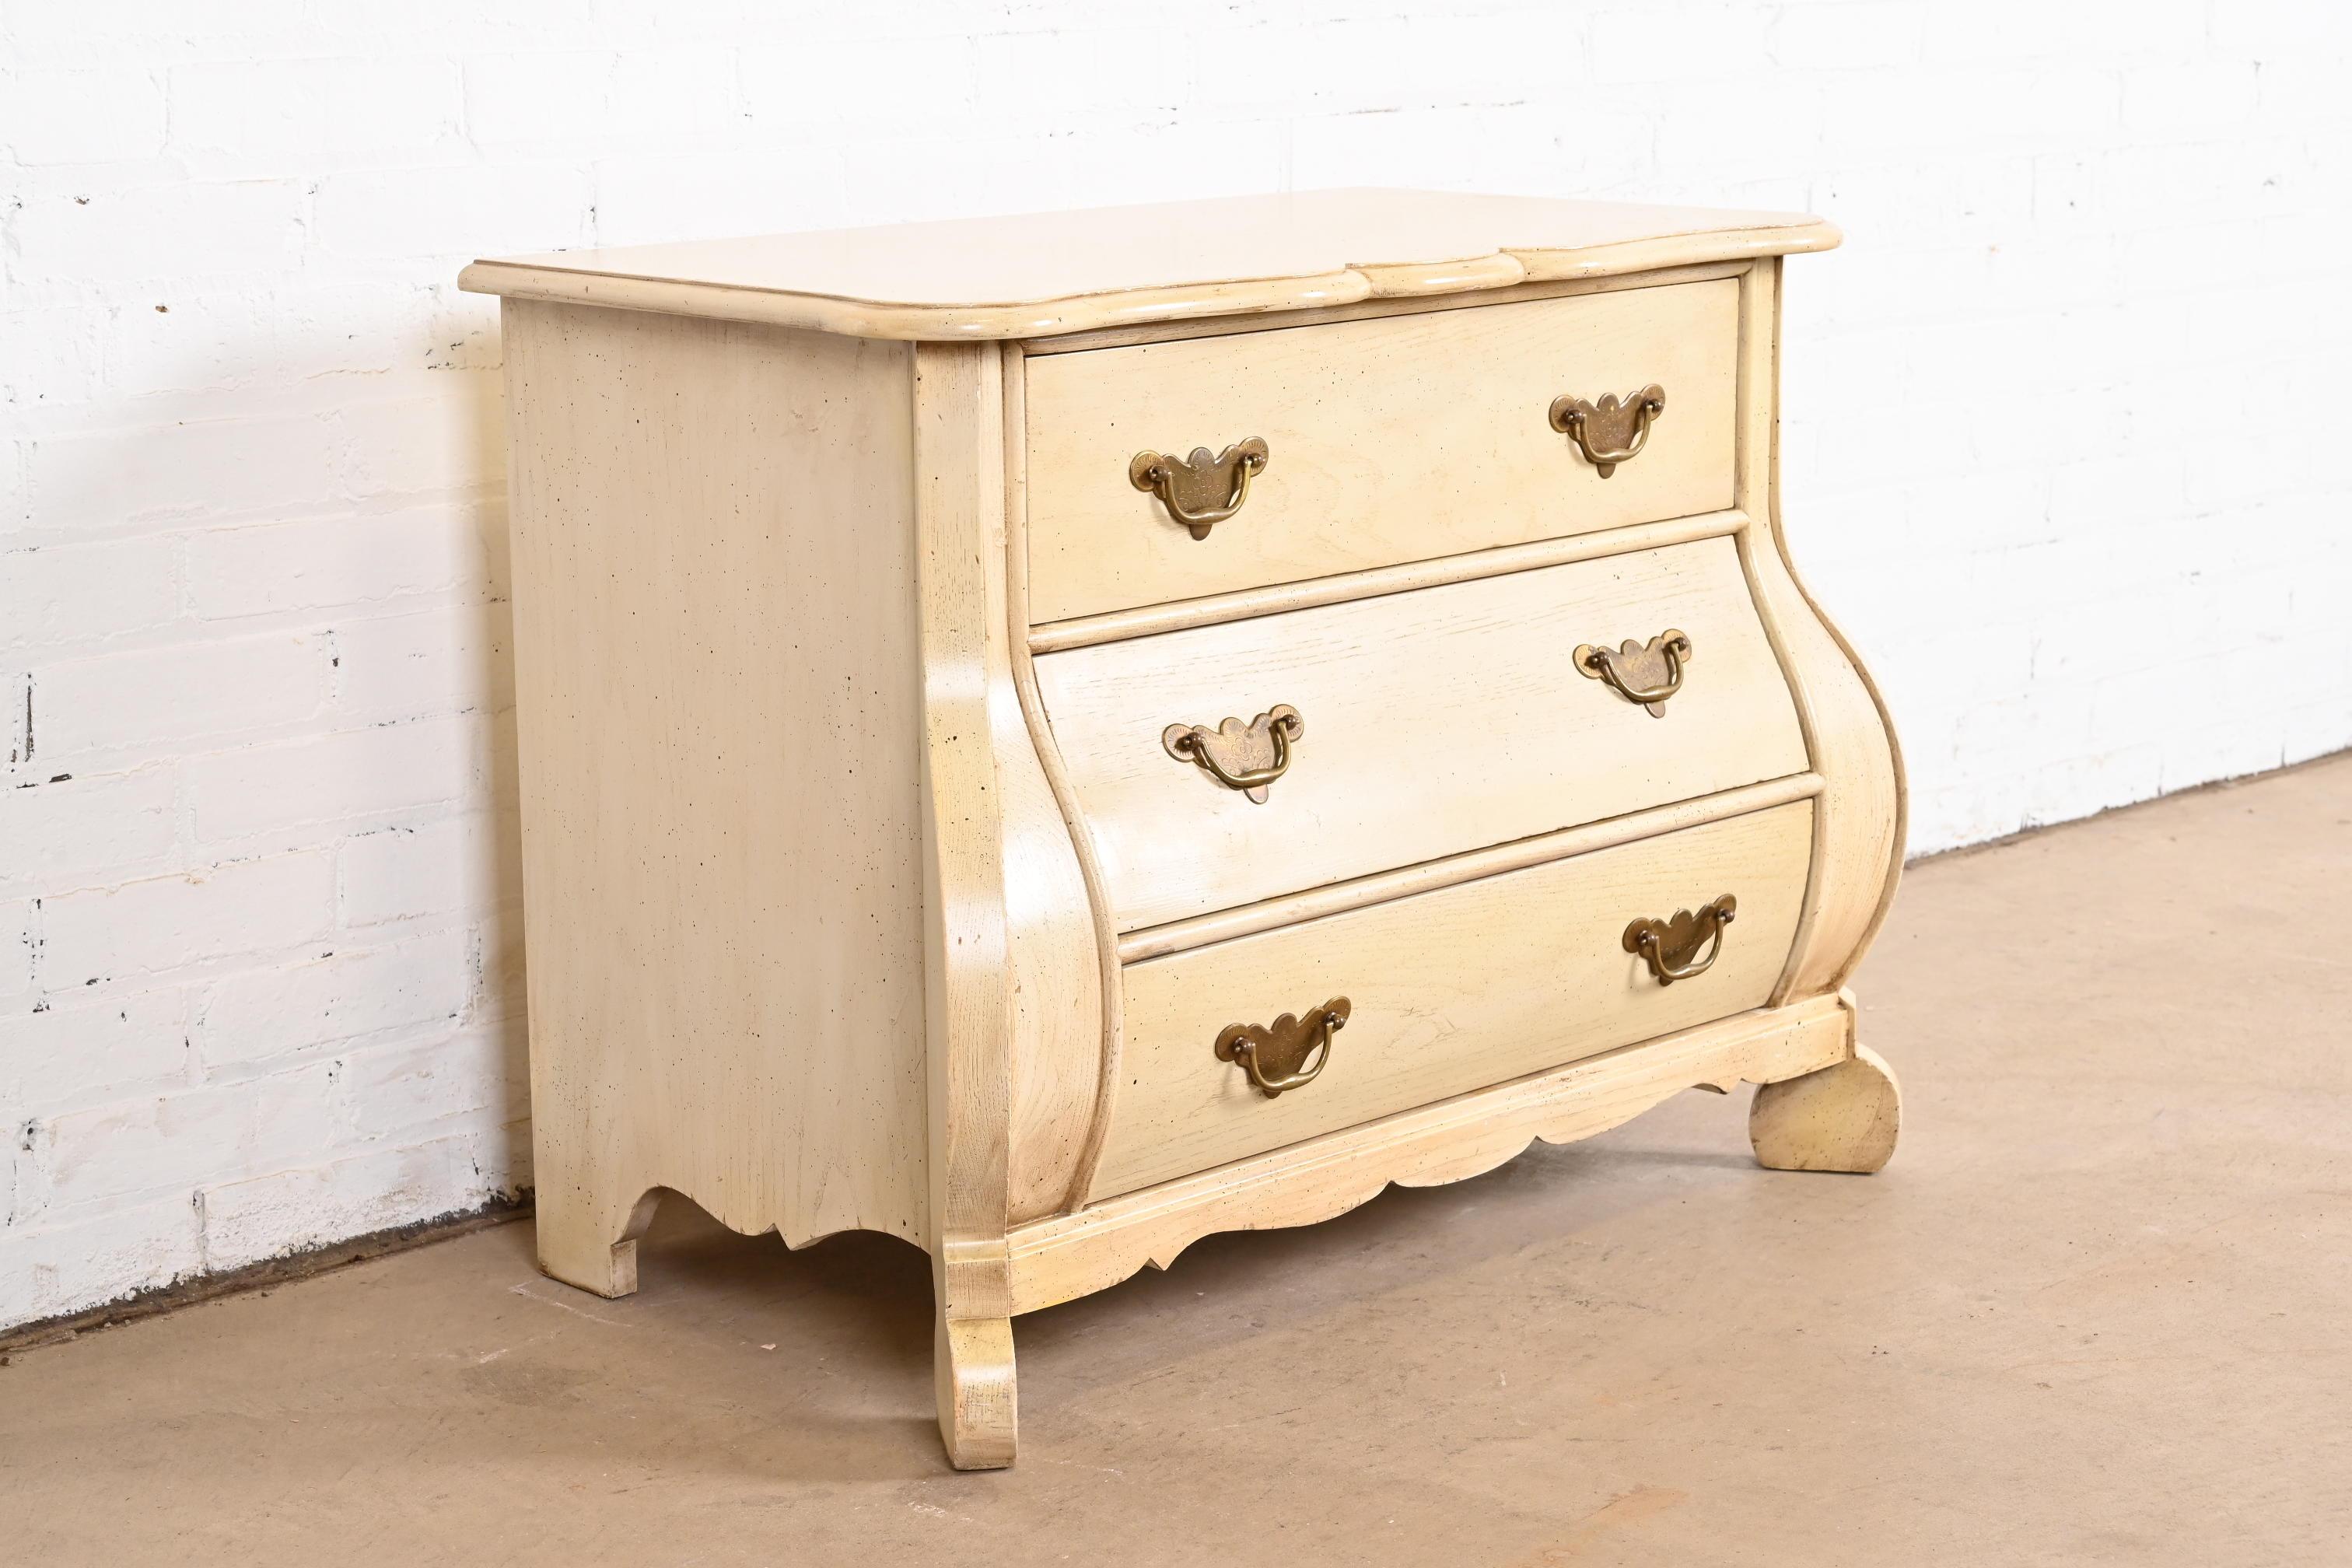 Baker Furniture Dutch Cream Painted Oak Bombe Chest or Commode In Good Condition For Sale In South Bend, IN